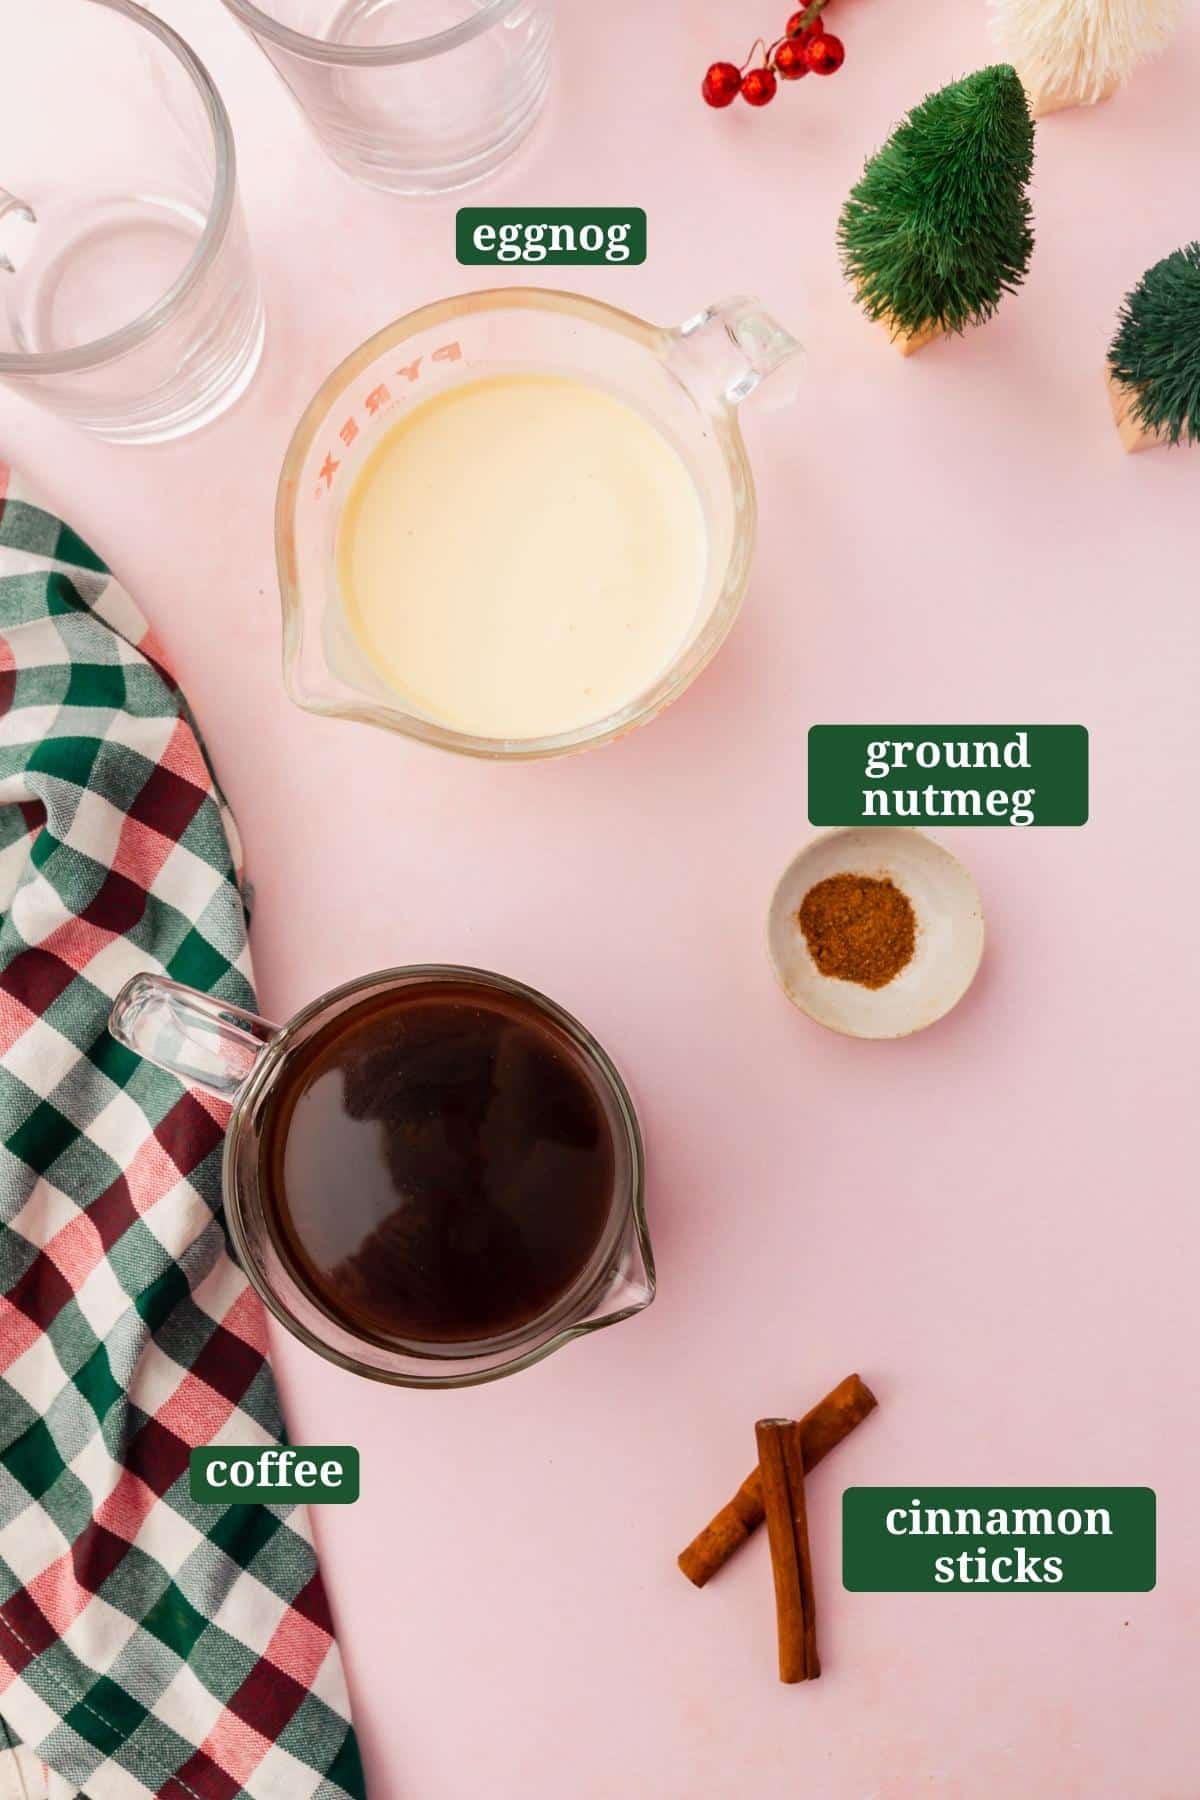 Ingredients in small bowls to make eggnog coffee, including eggnog, coffee, nutmeg, and cinnamon sticks with a text overlay over each ingredient.